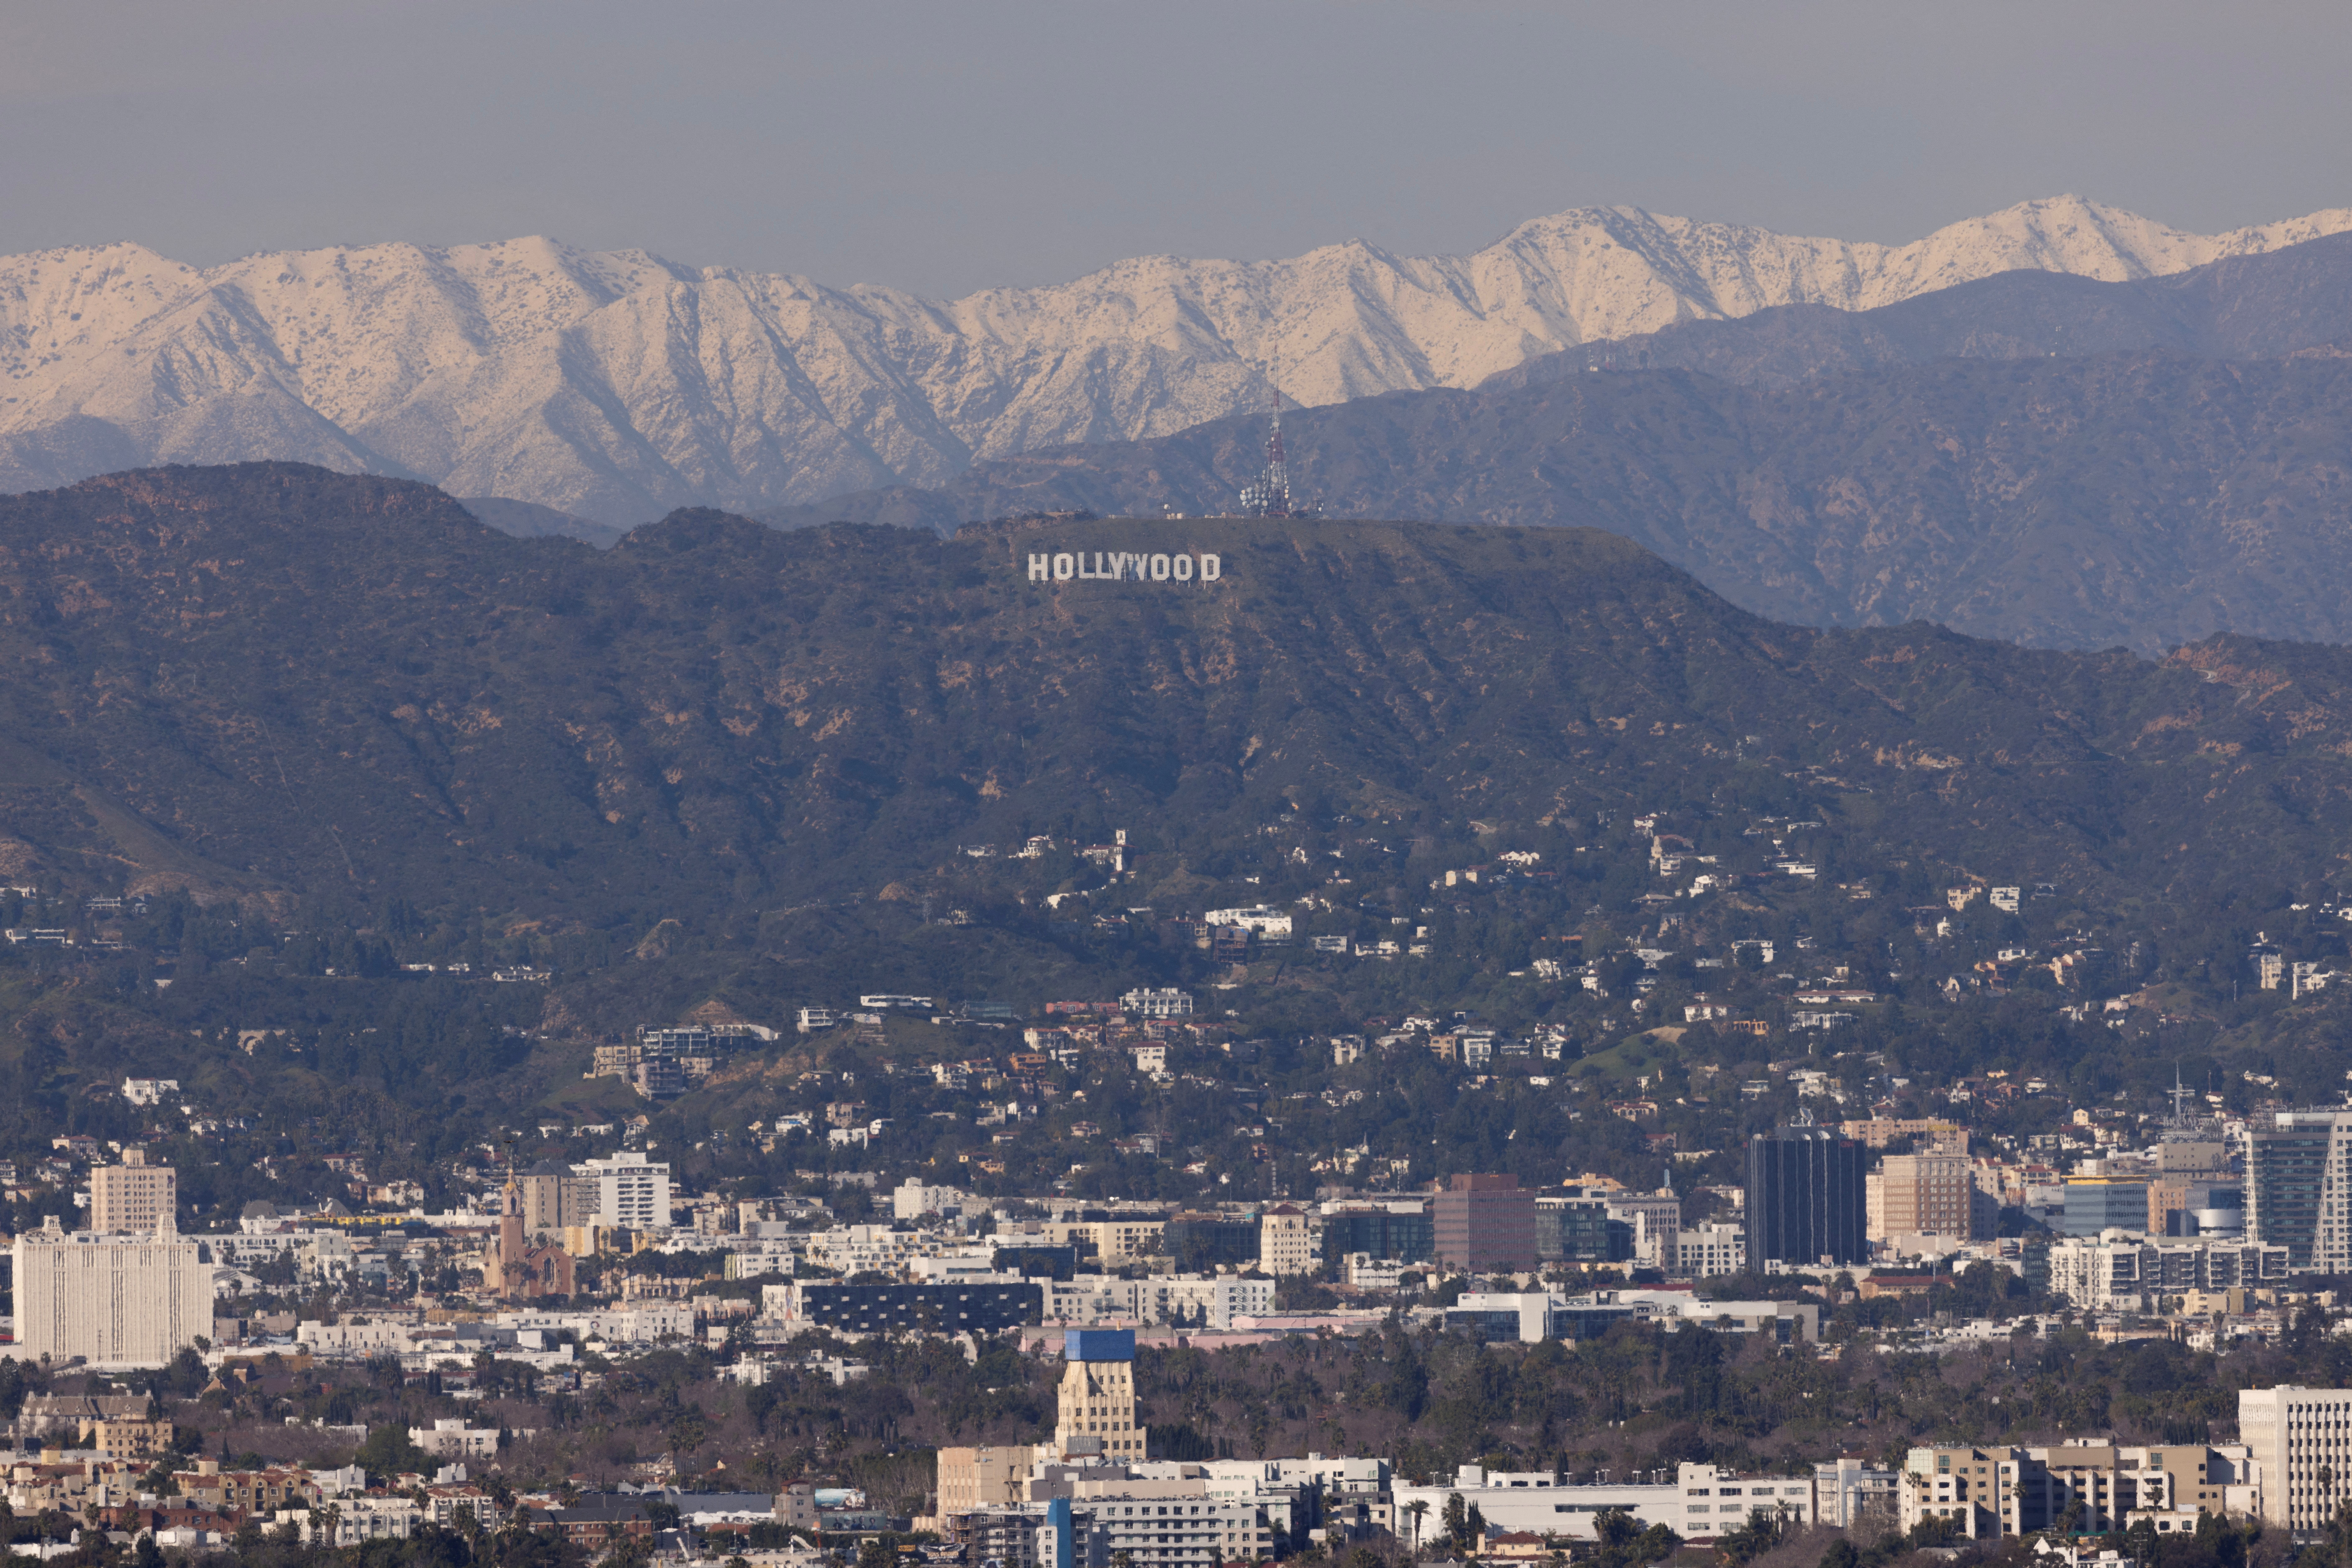 Snow-covered mountains surround the Hollywood sign in city of Los Angeles